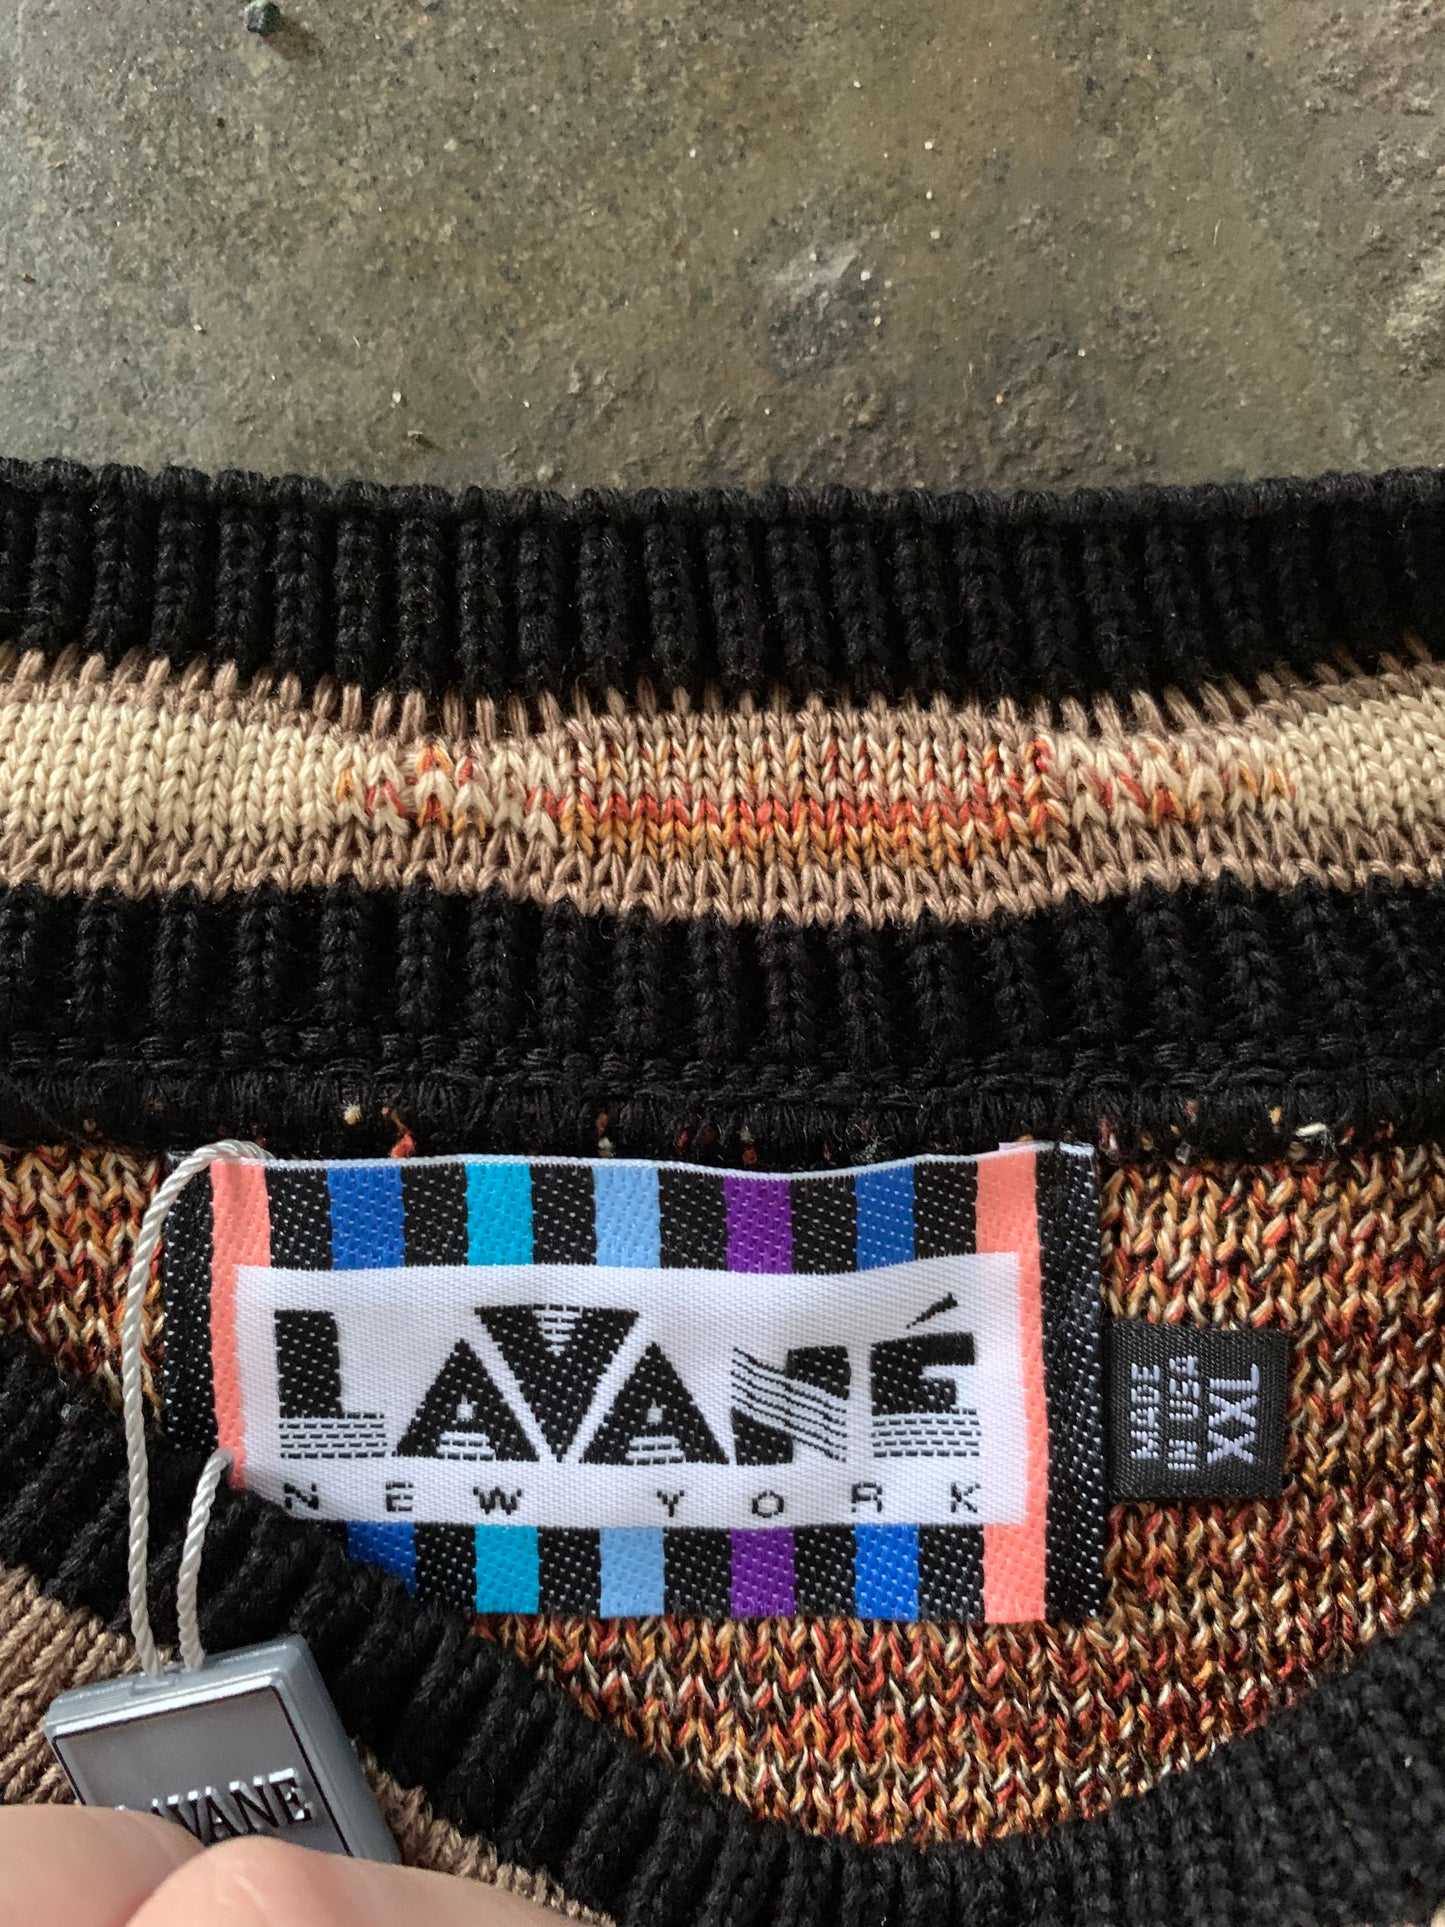 (2X) 90s Deadstock Lavane Coogi Style Knits